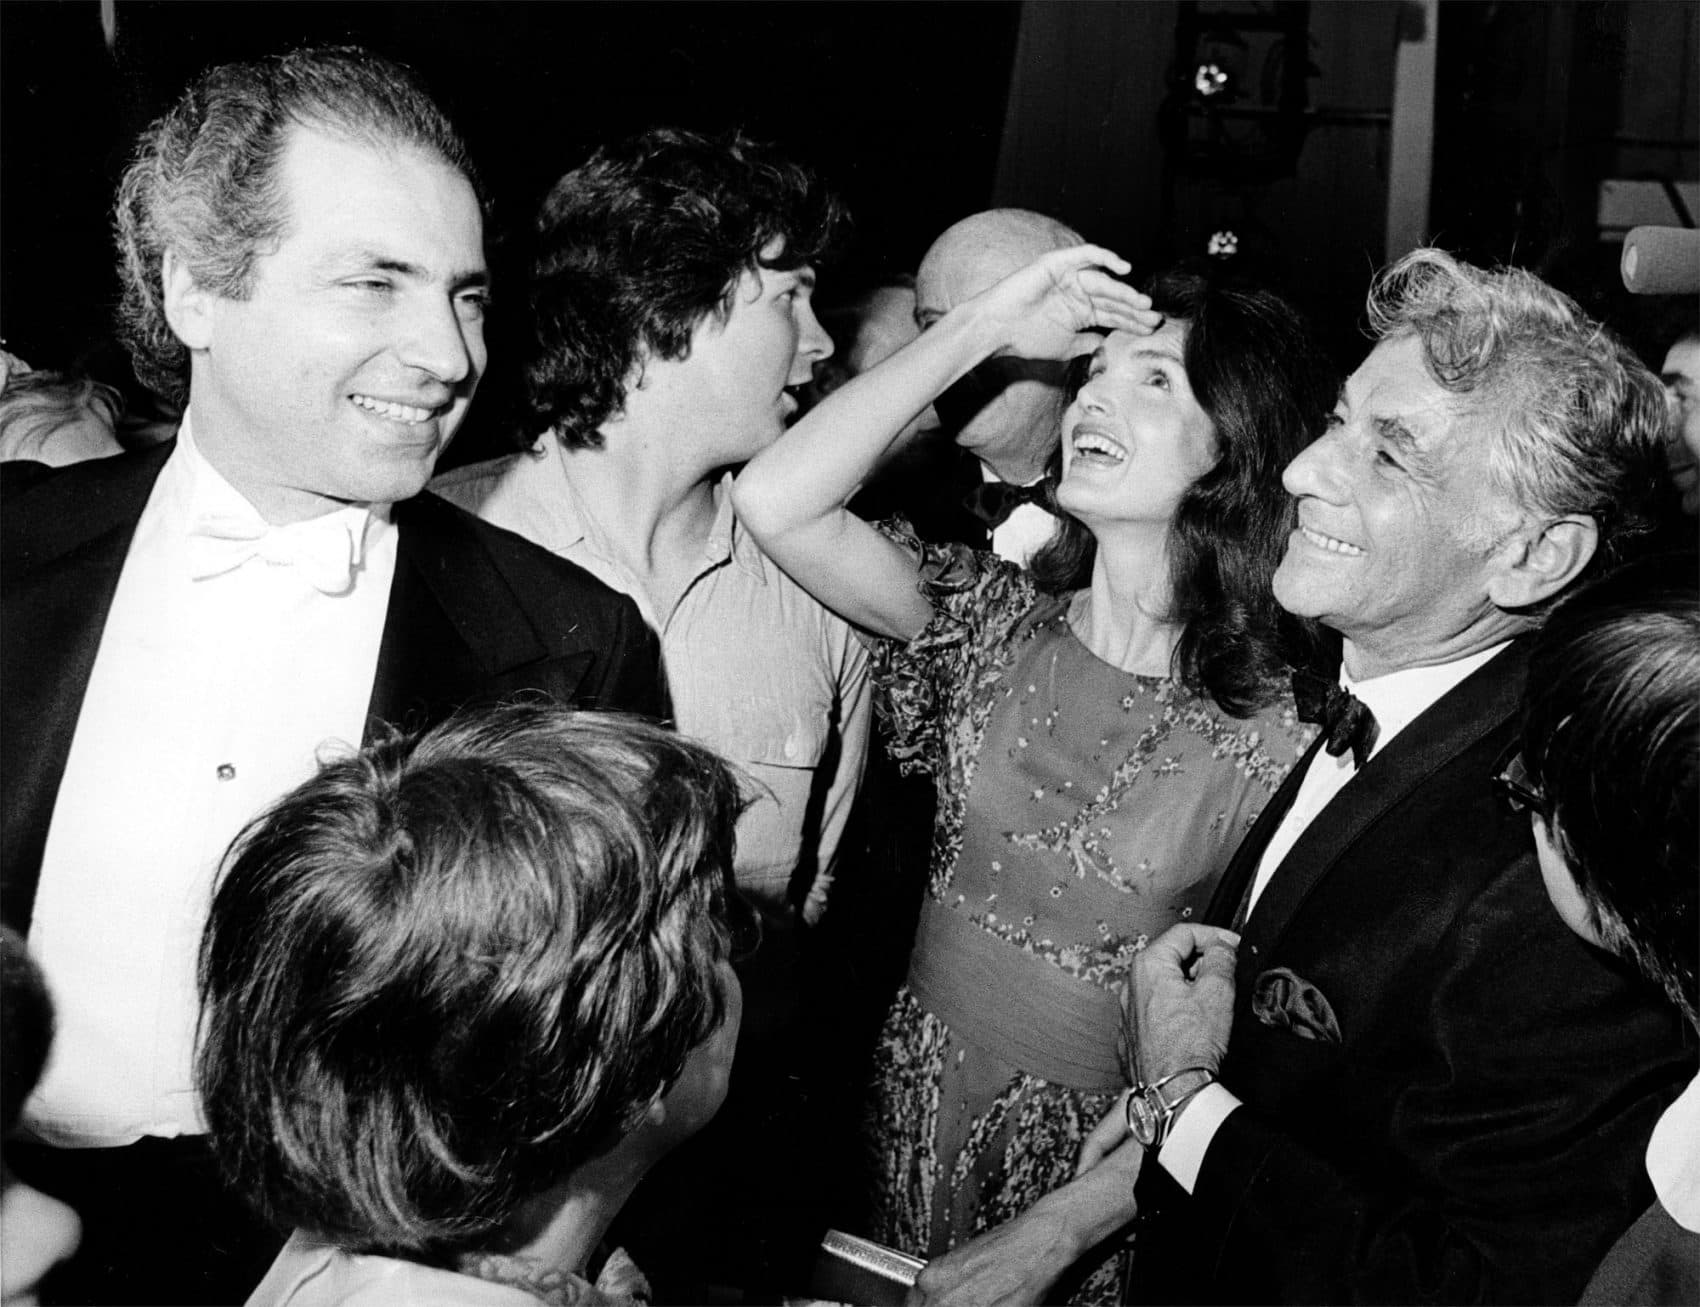 Jacqueline Kennedy Onassis shields the light from her eyes as she looks up at the stage in the John F. Kennedy Center for the Performing Arts on June 5, 1972, in Washington. With her is conductor-composer Leonard Bernstein who wrote &quot;Mass&quot; for the opening of the cultural center. (AP)